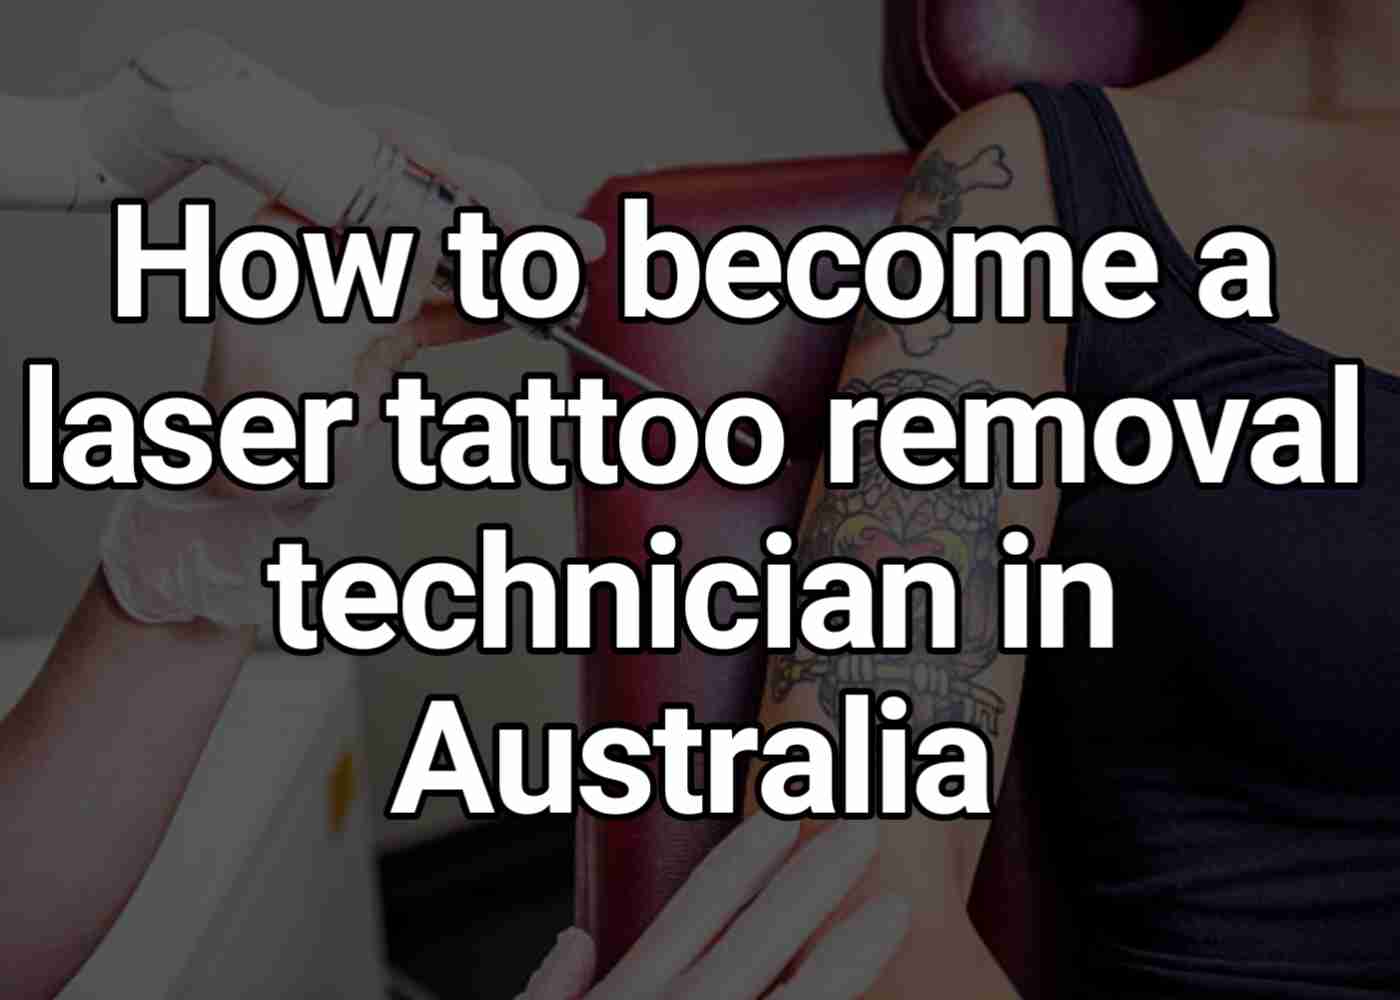 How Much Can You Make Removing Tattoos? | National Laser Institute